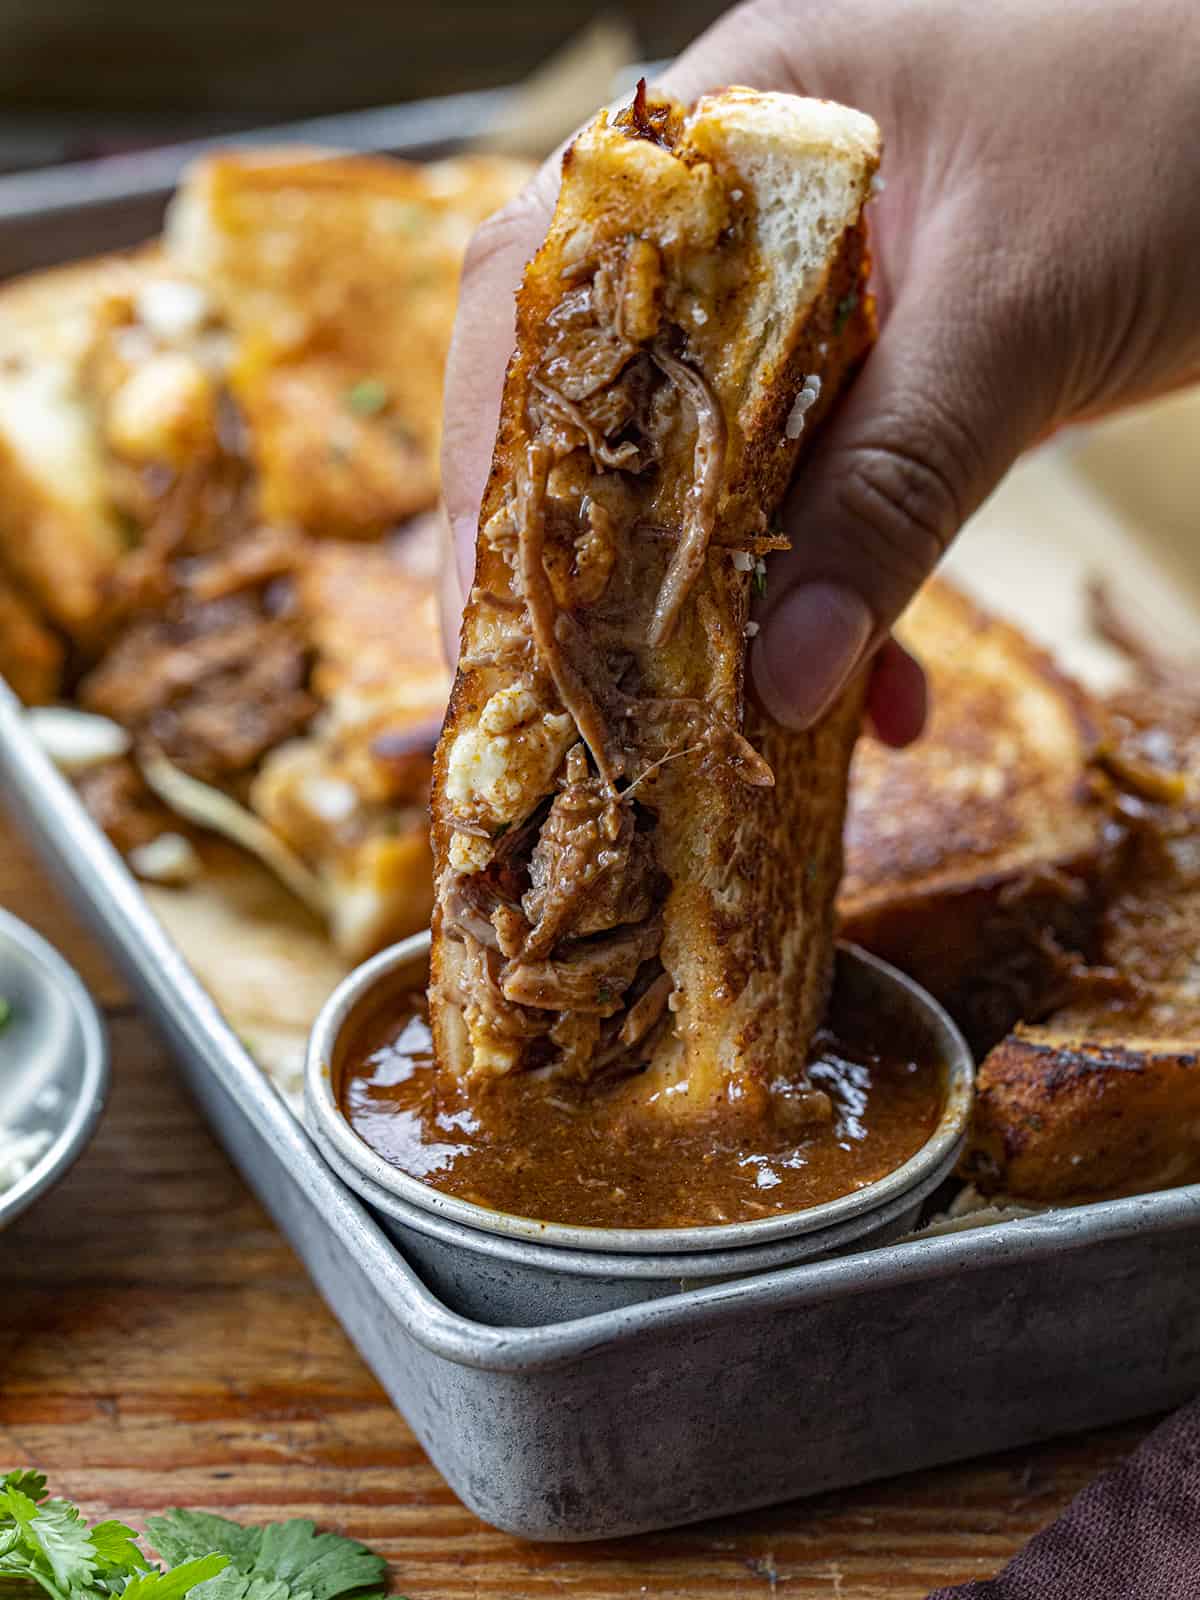 Hand Dipping a Birria Grilled Cheese Into Sauce. Dinner, Supper. Grilled Cheese, Best Grilled Cheese, Birria Grilled Cheese Sandwich, Shredded Beef Grilled Cheese, Superbowl Food, Game Day Food, Football Recipes, i am homesteader, iamhomesteader